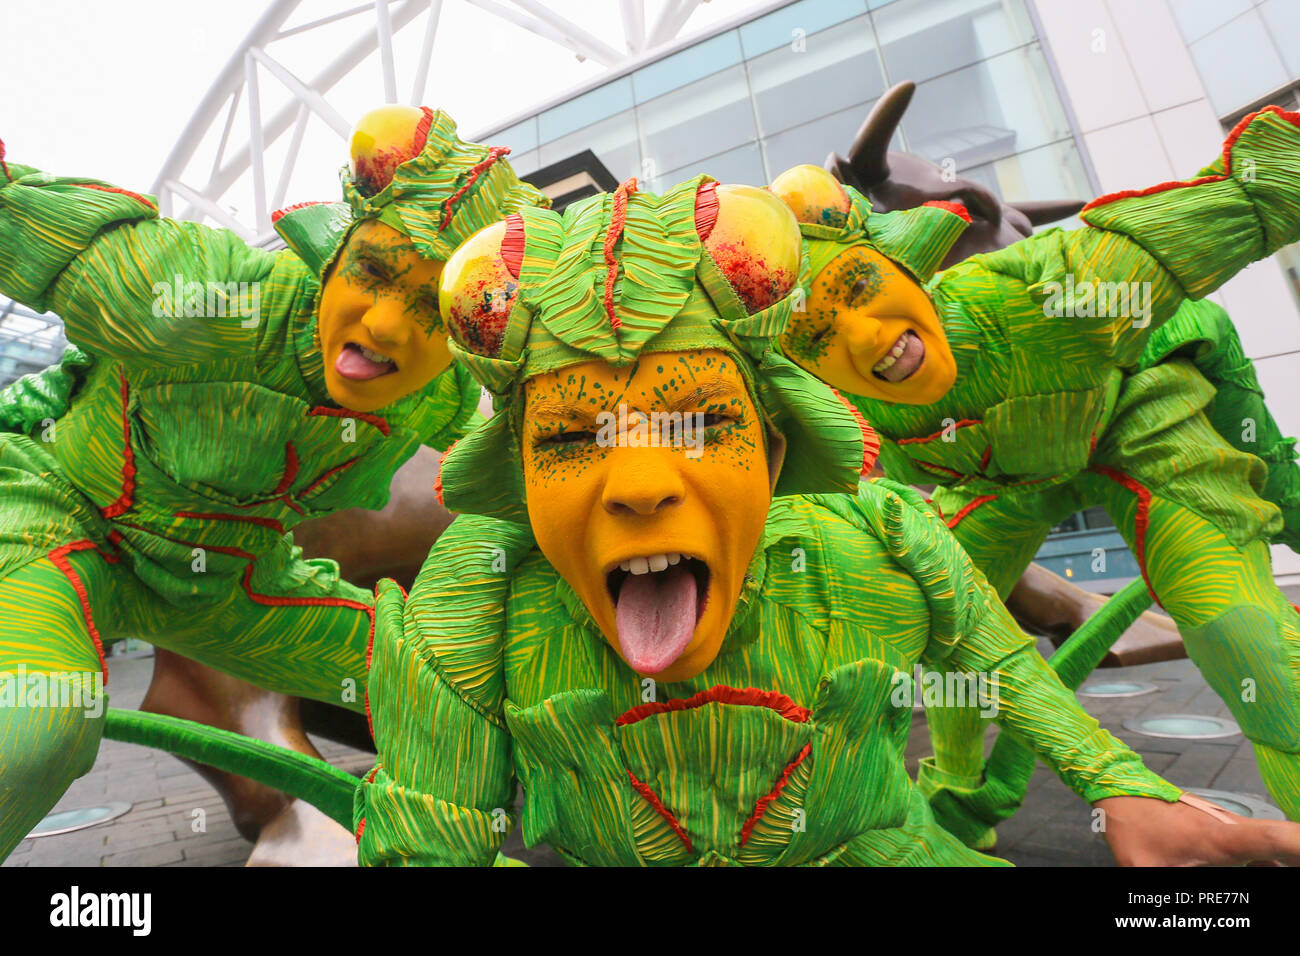 Birmingham, UK. 2nd October, 2018. Three of the cast of crickets in Cirque de Soleil's OVO show arrive in Birmingham Bull Ring ahead of their premiere performance on Wednesday 3rd October in The Arena, Birmingham. The production of one of the world's most creative and skilful circuses runs from 3rd - 7th October 2018. Peter Lopeman/Alamy Live News Stock Photo